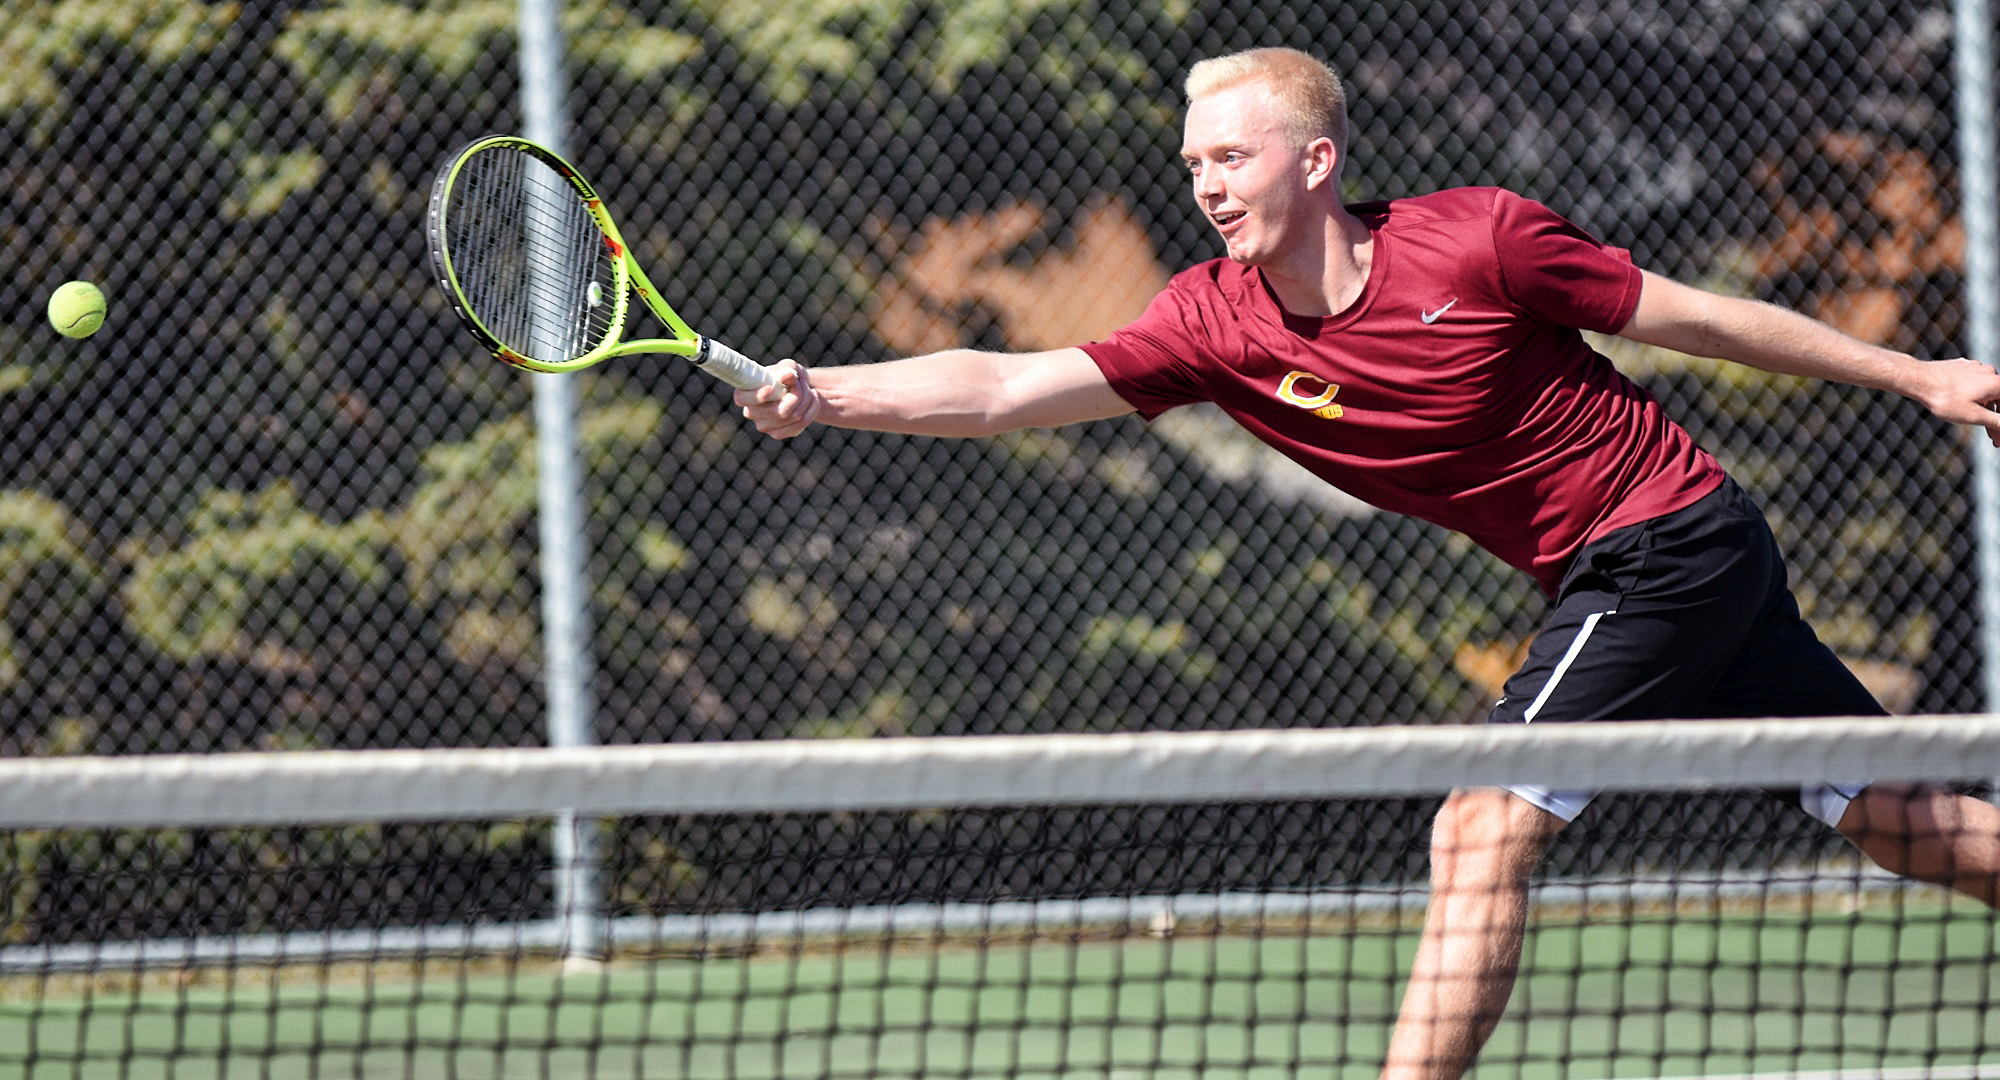 Junior Jared Saue earned two of the Cobbers' three wins on opening weekend. He won his singles match on Saturday and then claimed a doubles win with Erik Porter on Sunday.